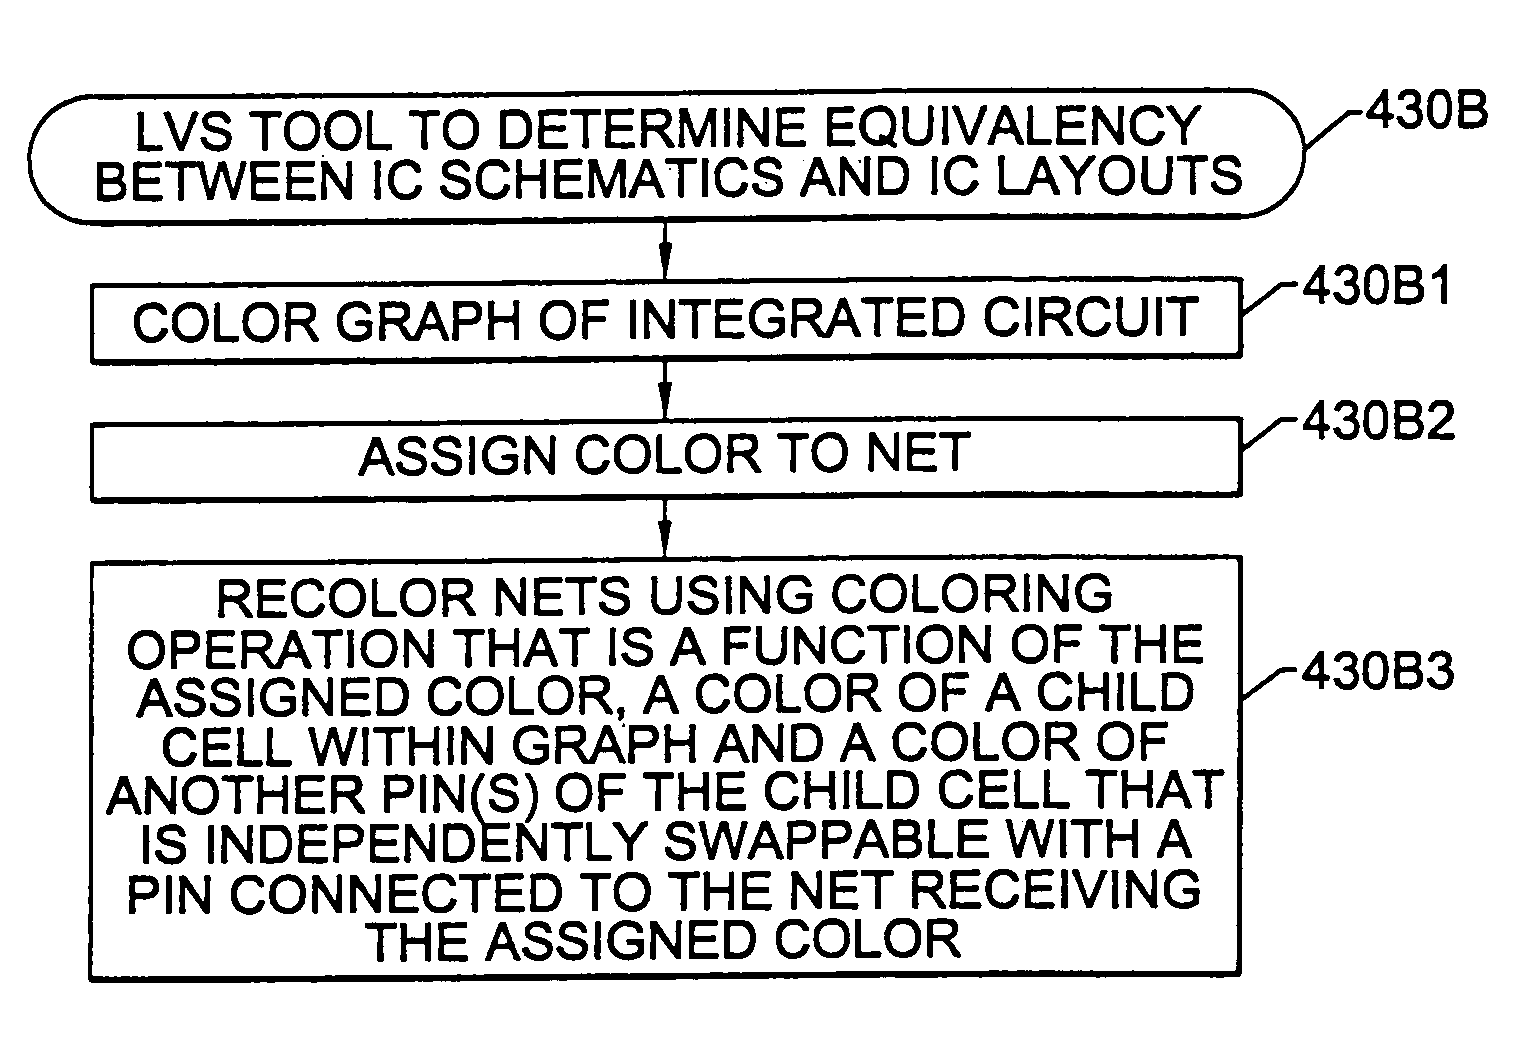 Methods, apparatus and computer program products that perform layout versus schematic comparison of integrated circuits using advanced pin coloring operations